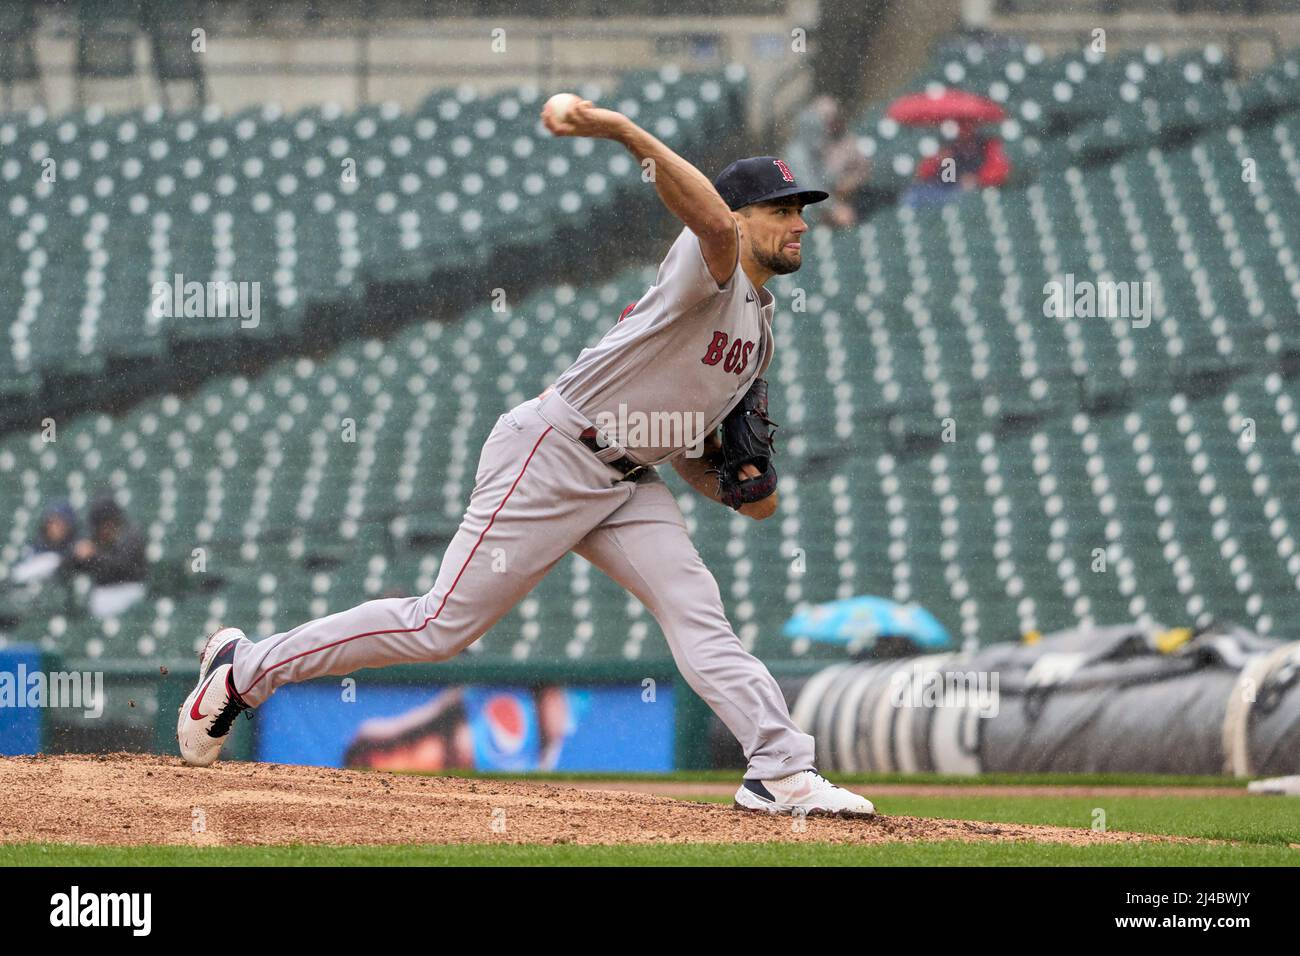 Detroit MI, USA. 13th Apr, 2022. Boston pitcher Nathan Eovaldi (17) throws  a pitch during the game with Boston Red Sox and Detroit Tigers held at  Comercia Park in Detroit Mi. David